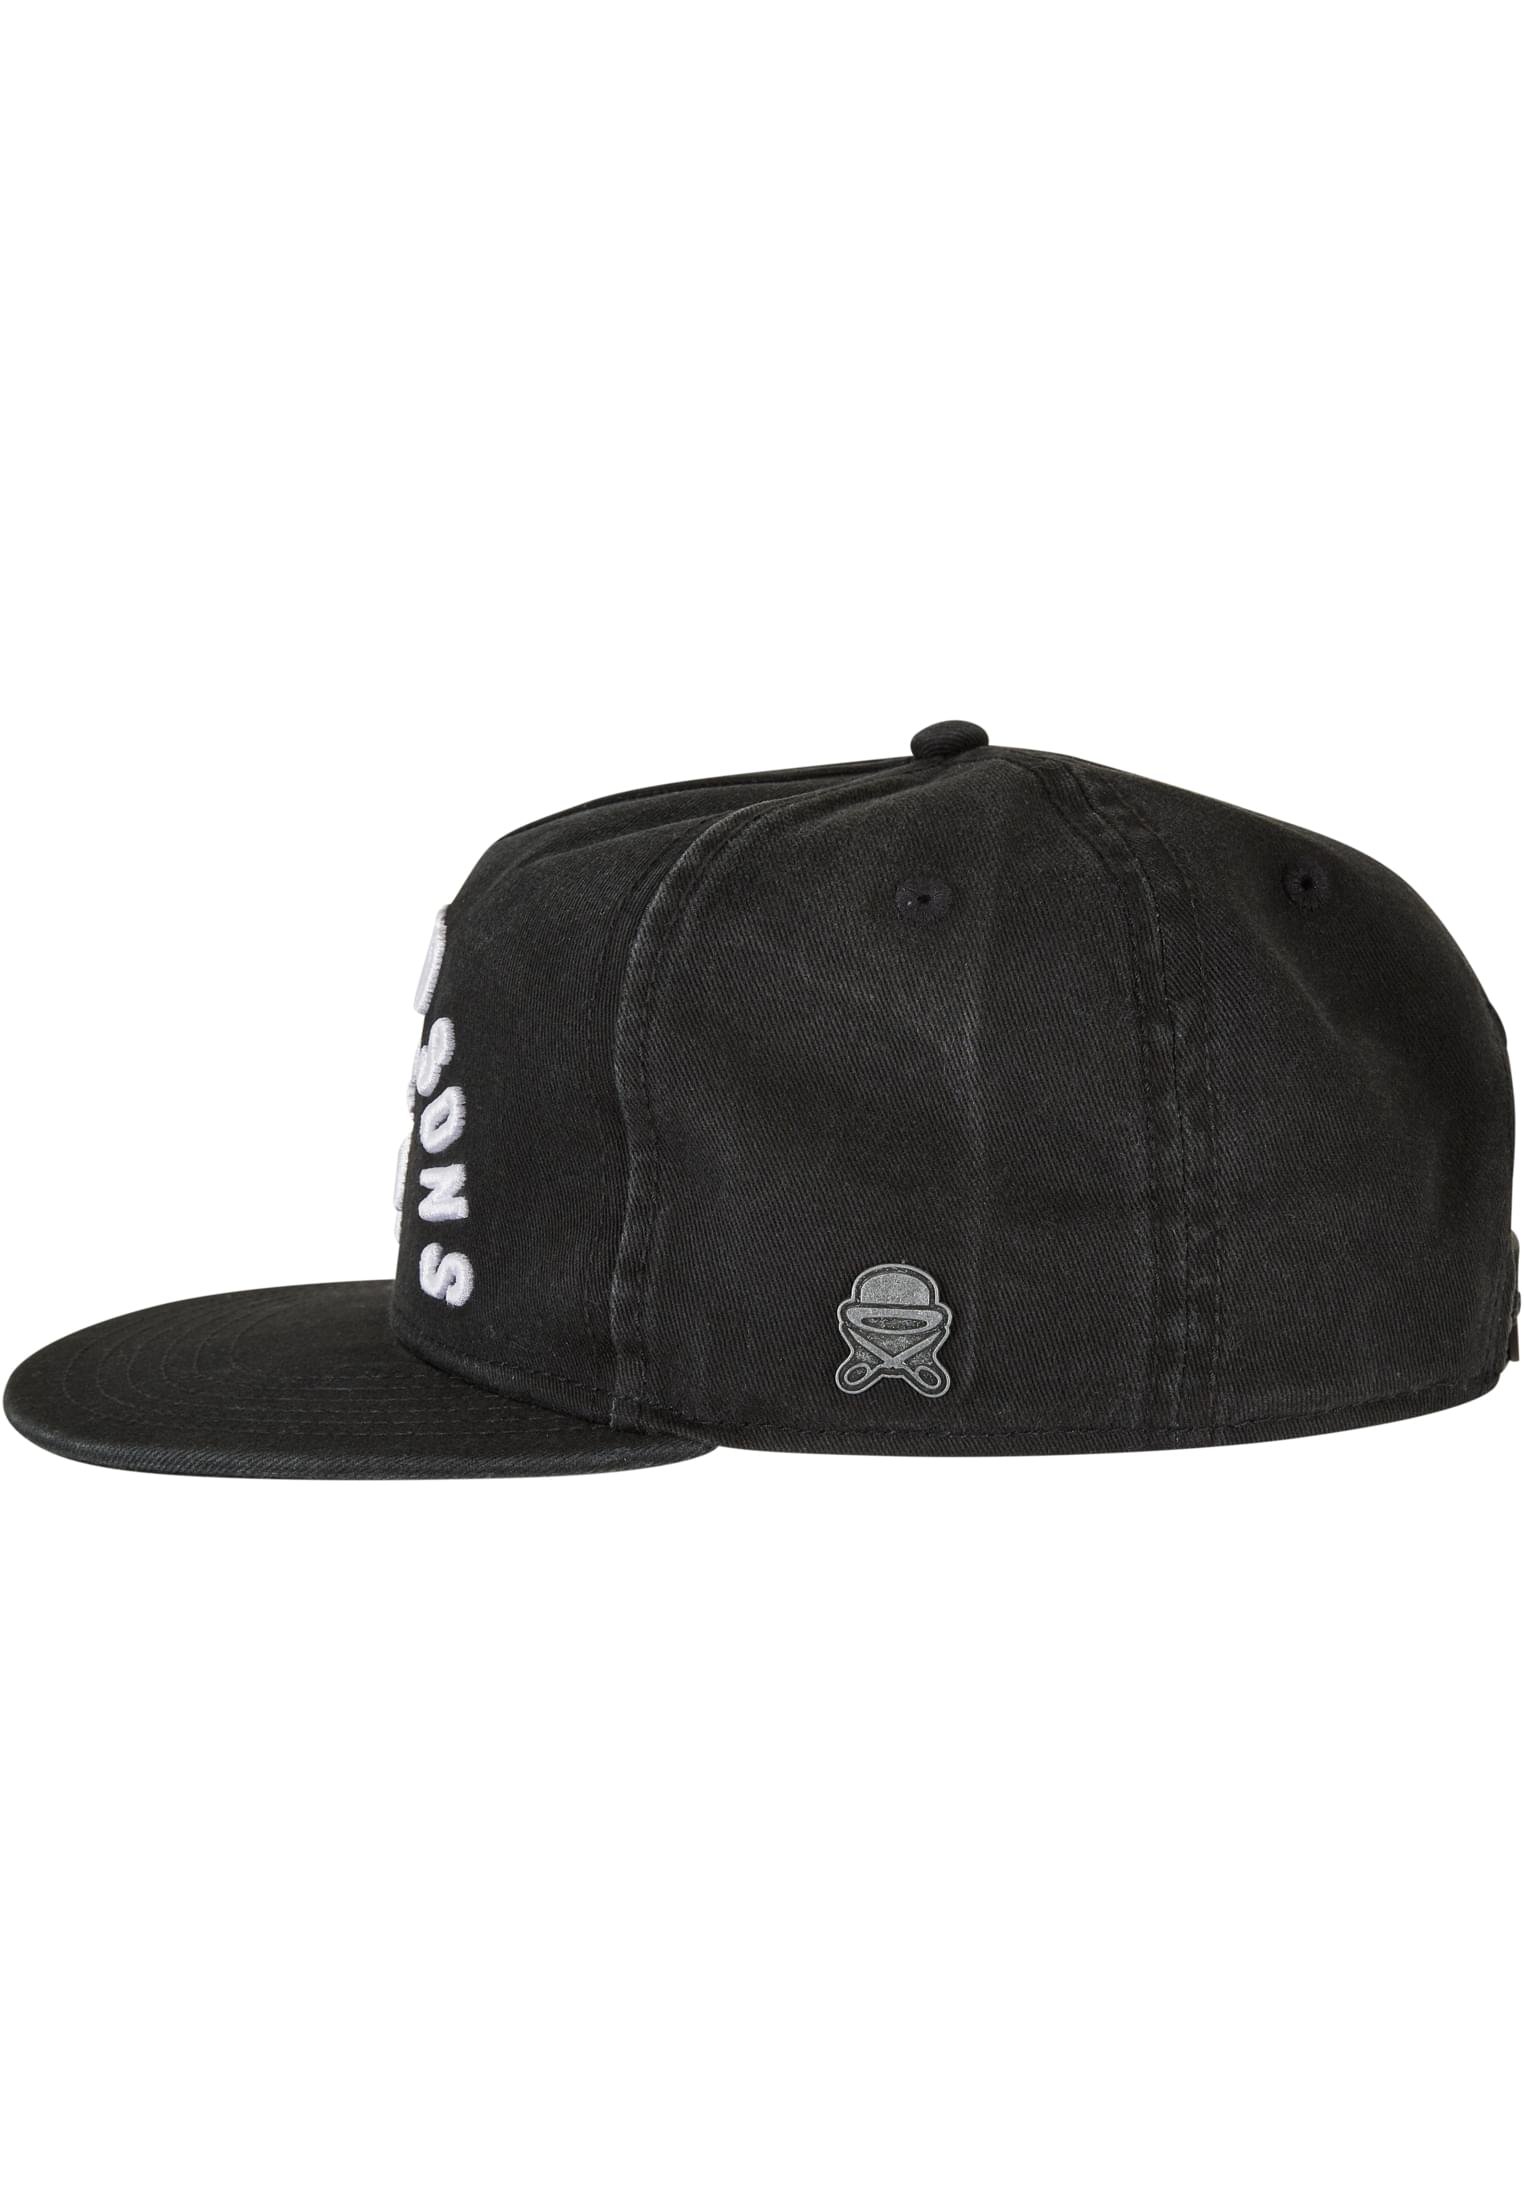 C&S CL Raw Pleasures Heavy Washed Snapback black heavy washed/white one size